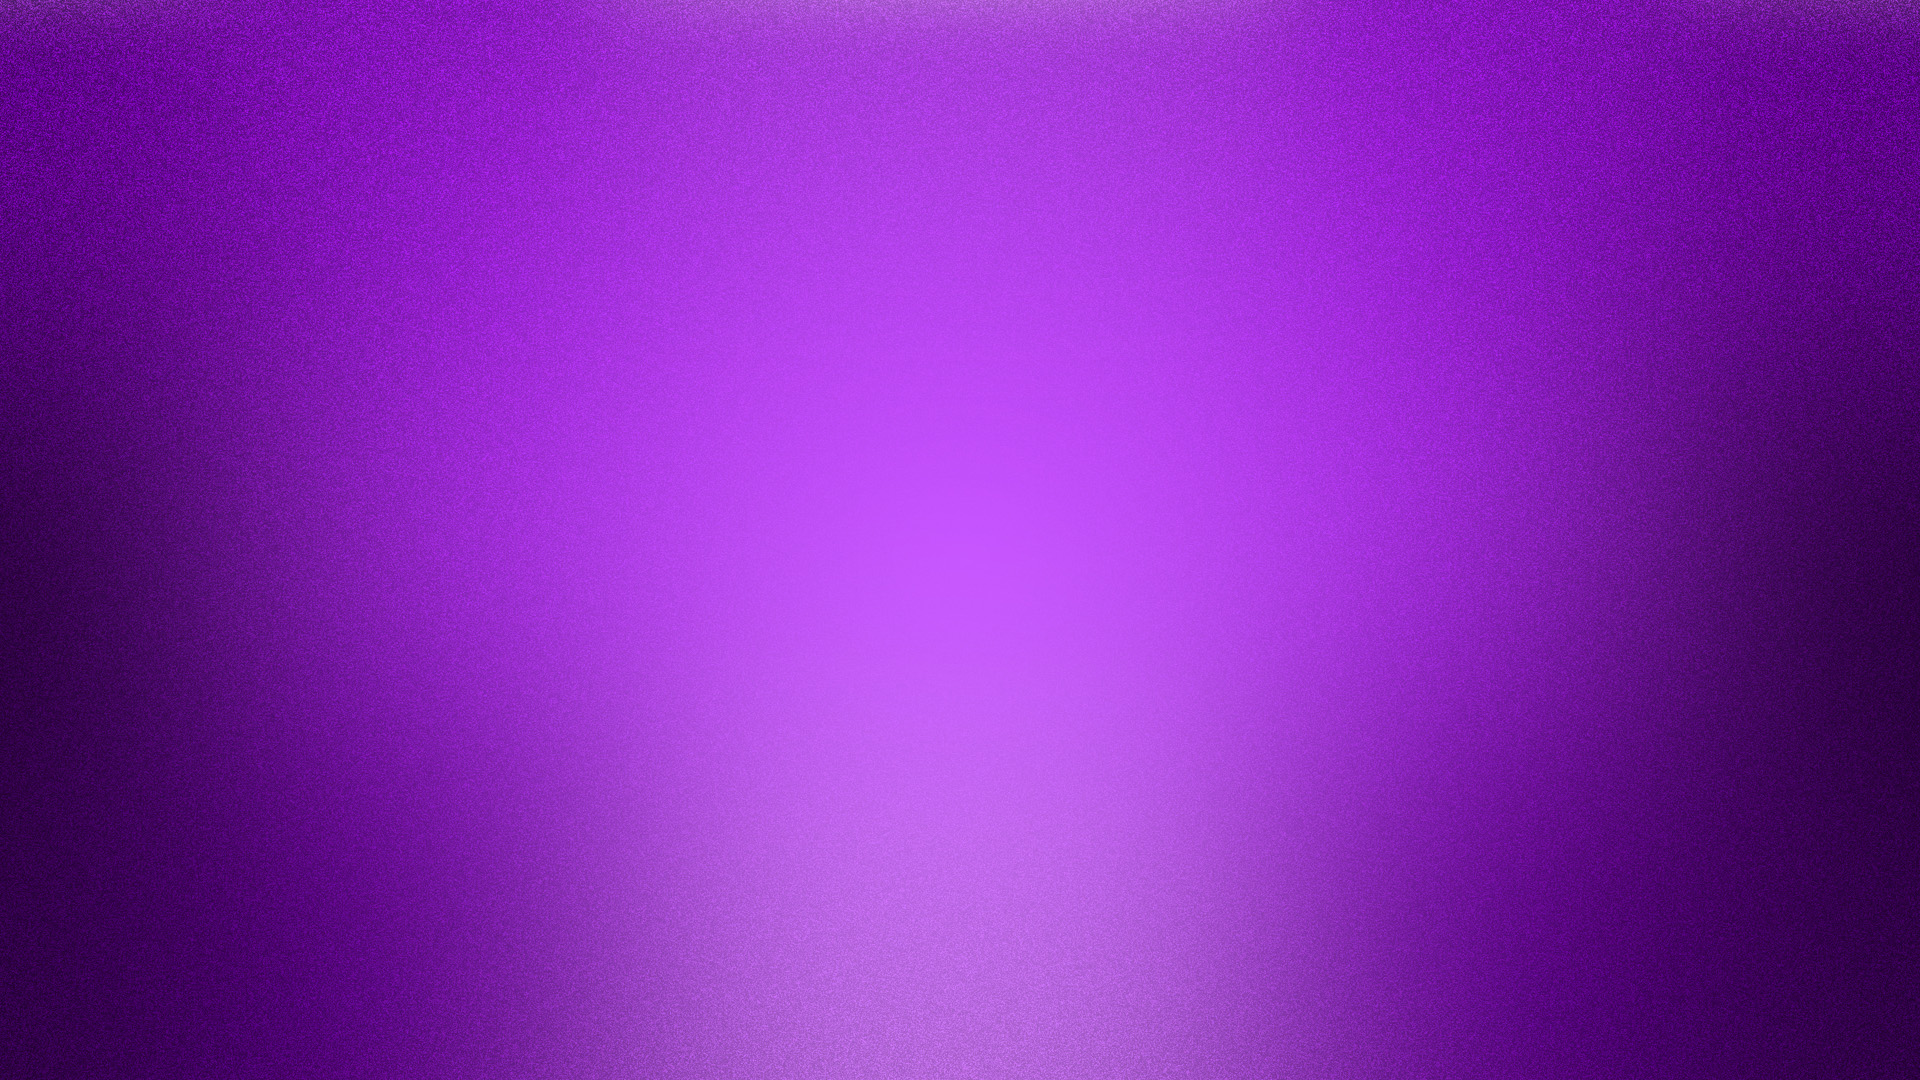 HD Purple Wallpaper Background Image To For